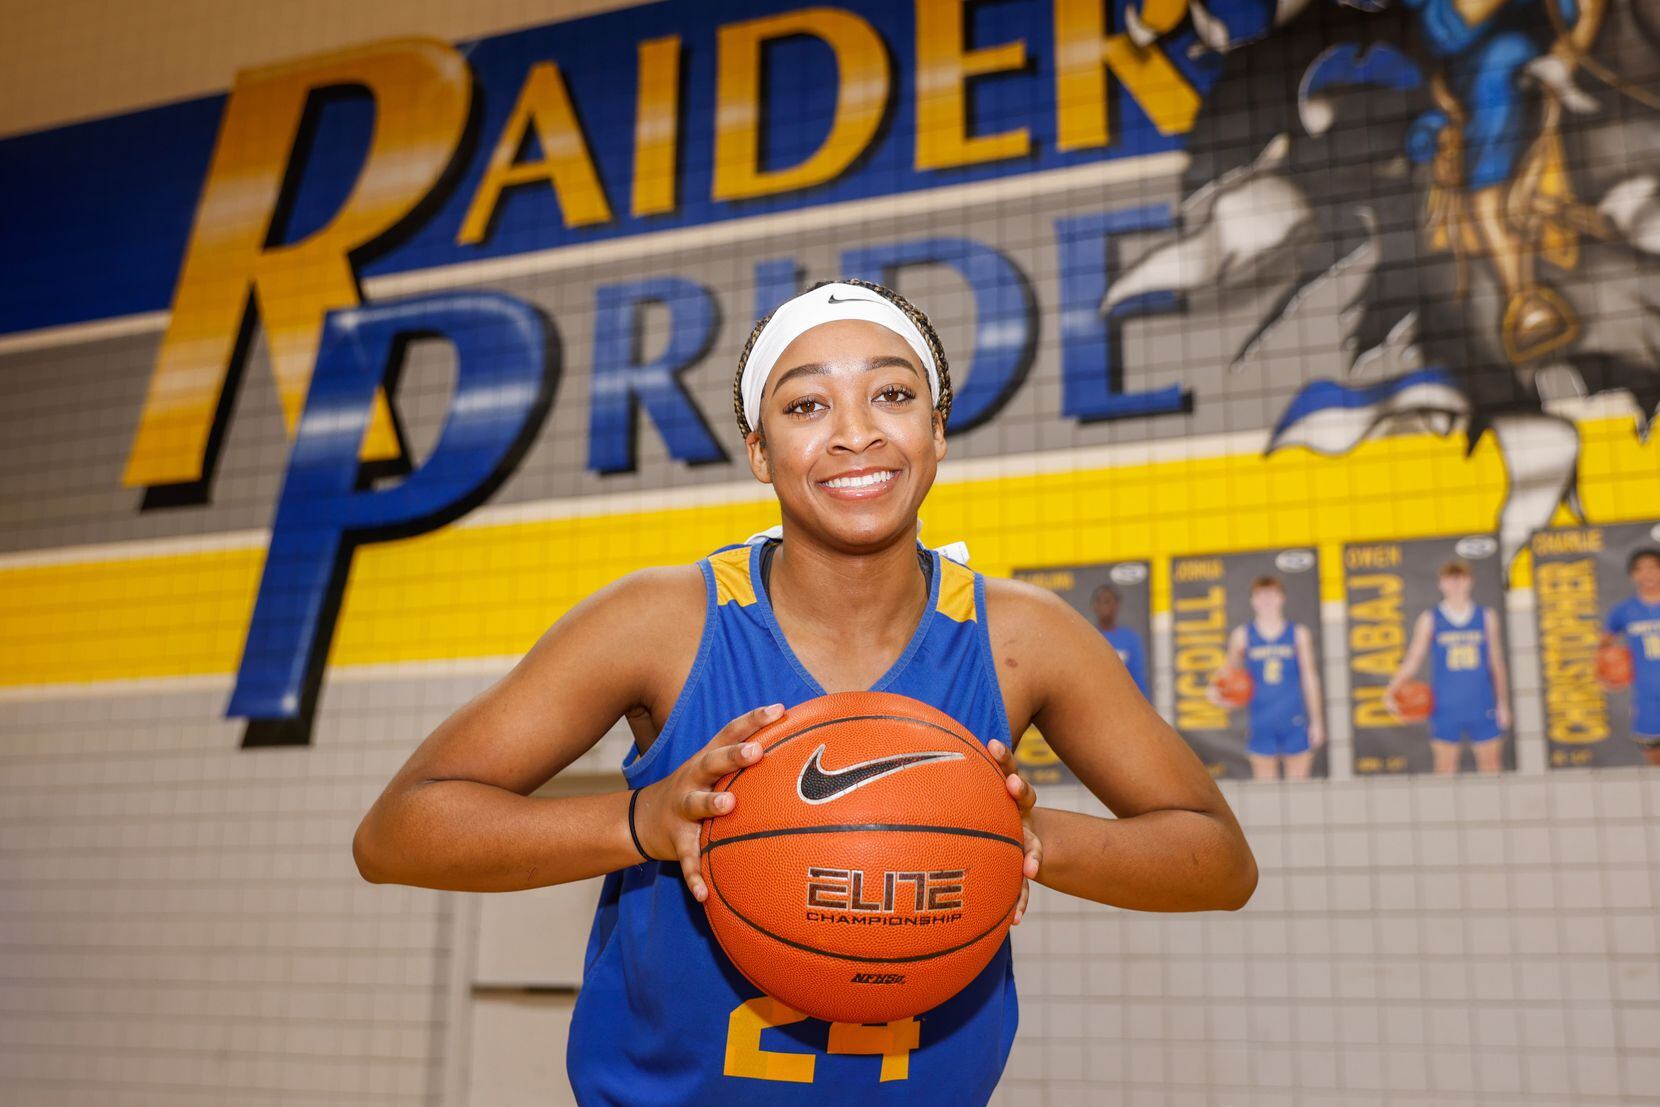 Sunnyvale girls basketball player Micah Russell in Sunnyvale on Wednesday